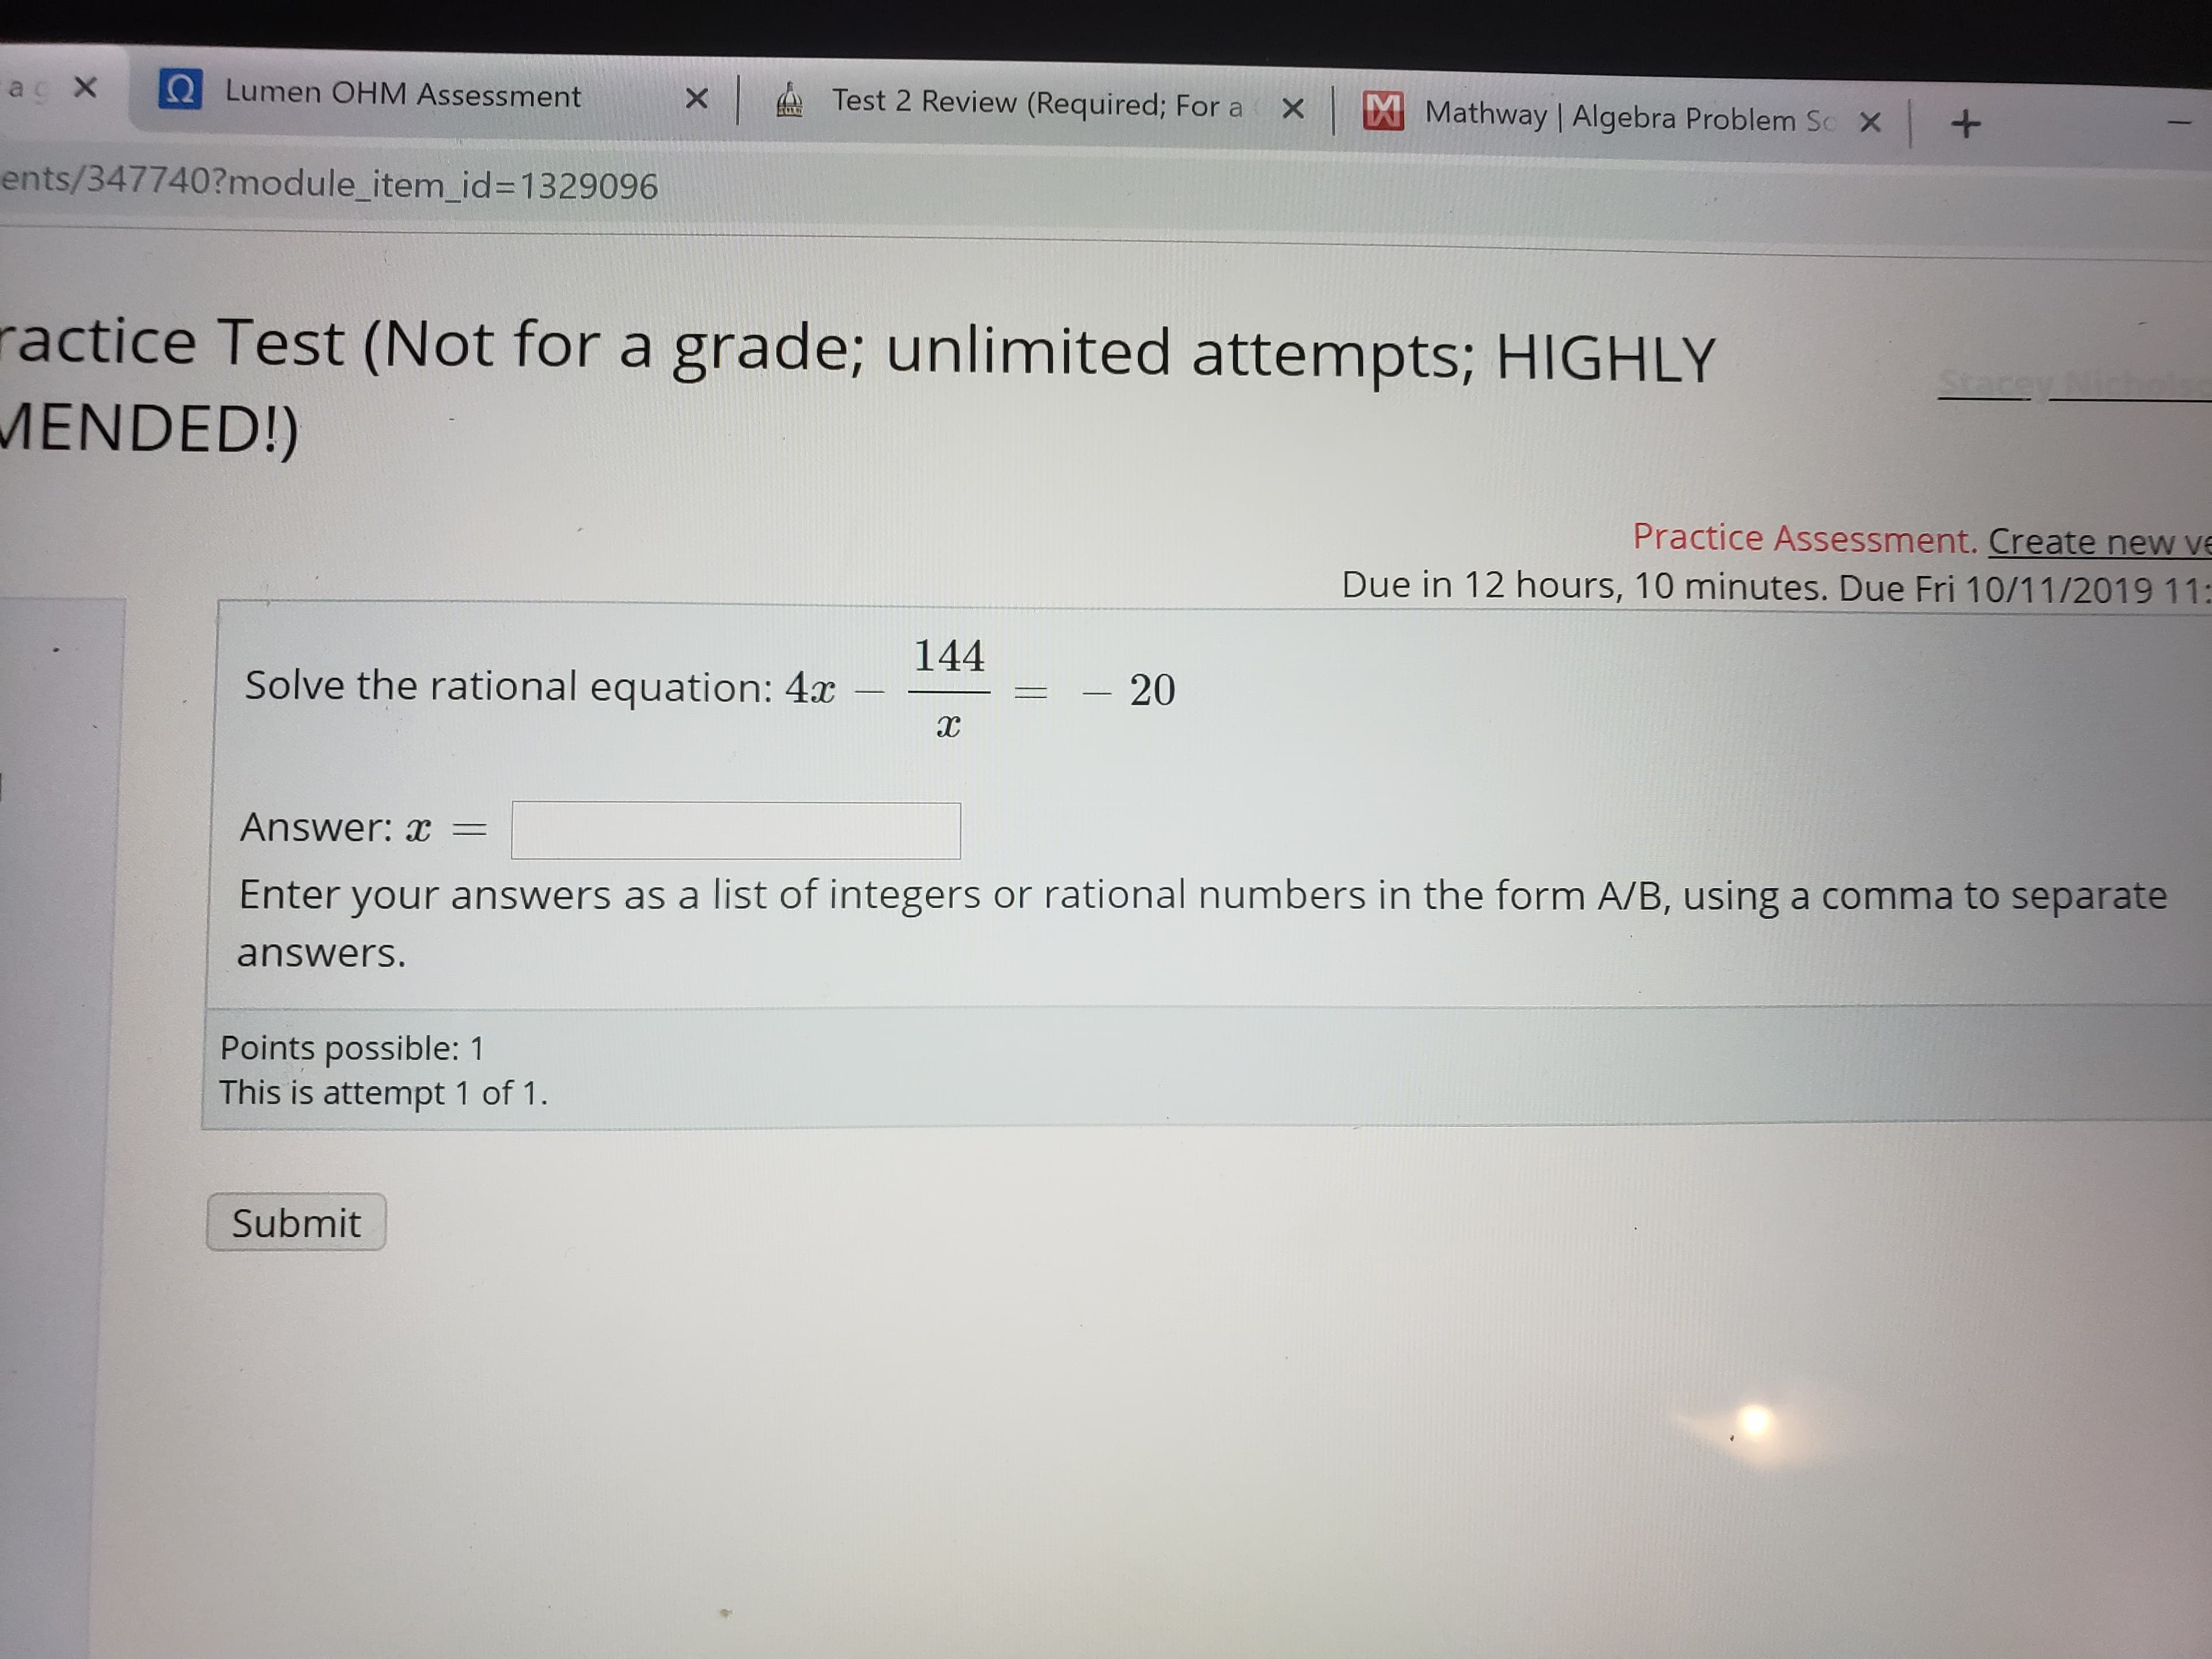 ac X
Lumen OHM Assessment
Test 2 Review (Required; For a
x
Mathway | Algebra Problem S
+
X
ents/347740?module_item_id=1329096
ractice Test (Not for a grade; unlimited attempts; HIGHLY
MENDED!)
rey ich
Practice Assessment. Create new ve
Due in 12 hours, 10 minutes. Due Fri 10/11/2019 11:
144
Solve the rational equation: 4x
- 20
Answer: x=
Enter your answers as a list of integers or rational numbers in the form A/B, using a comma to separate
answers.
Points possible: 1
This is attempt 1 of 1
Submit
